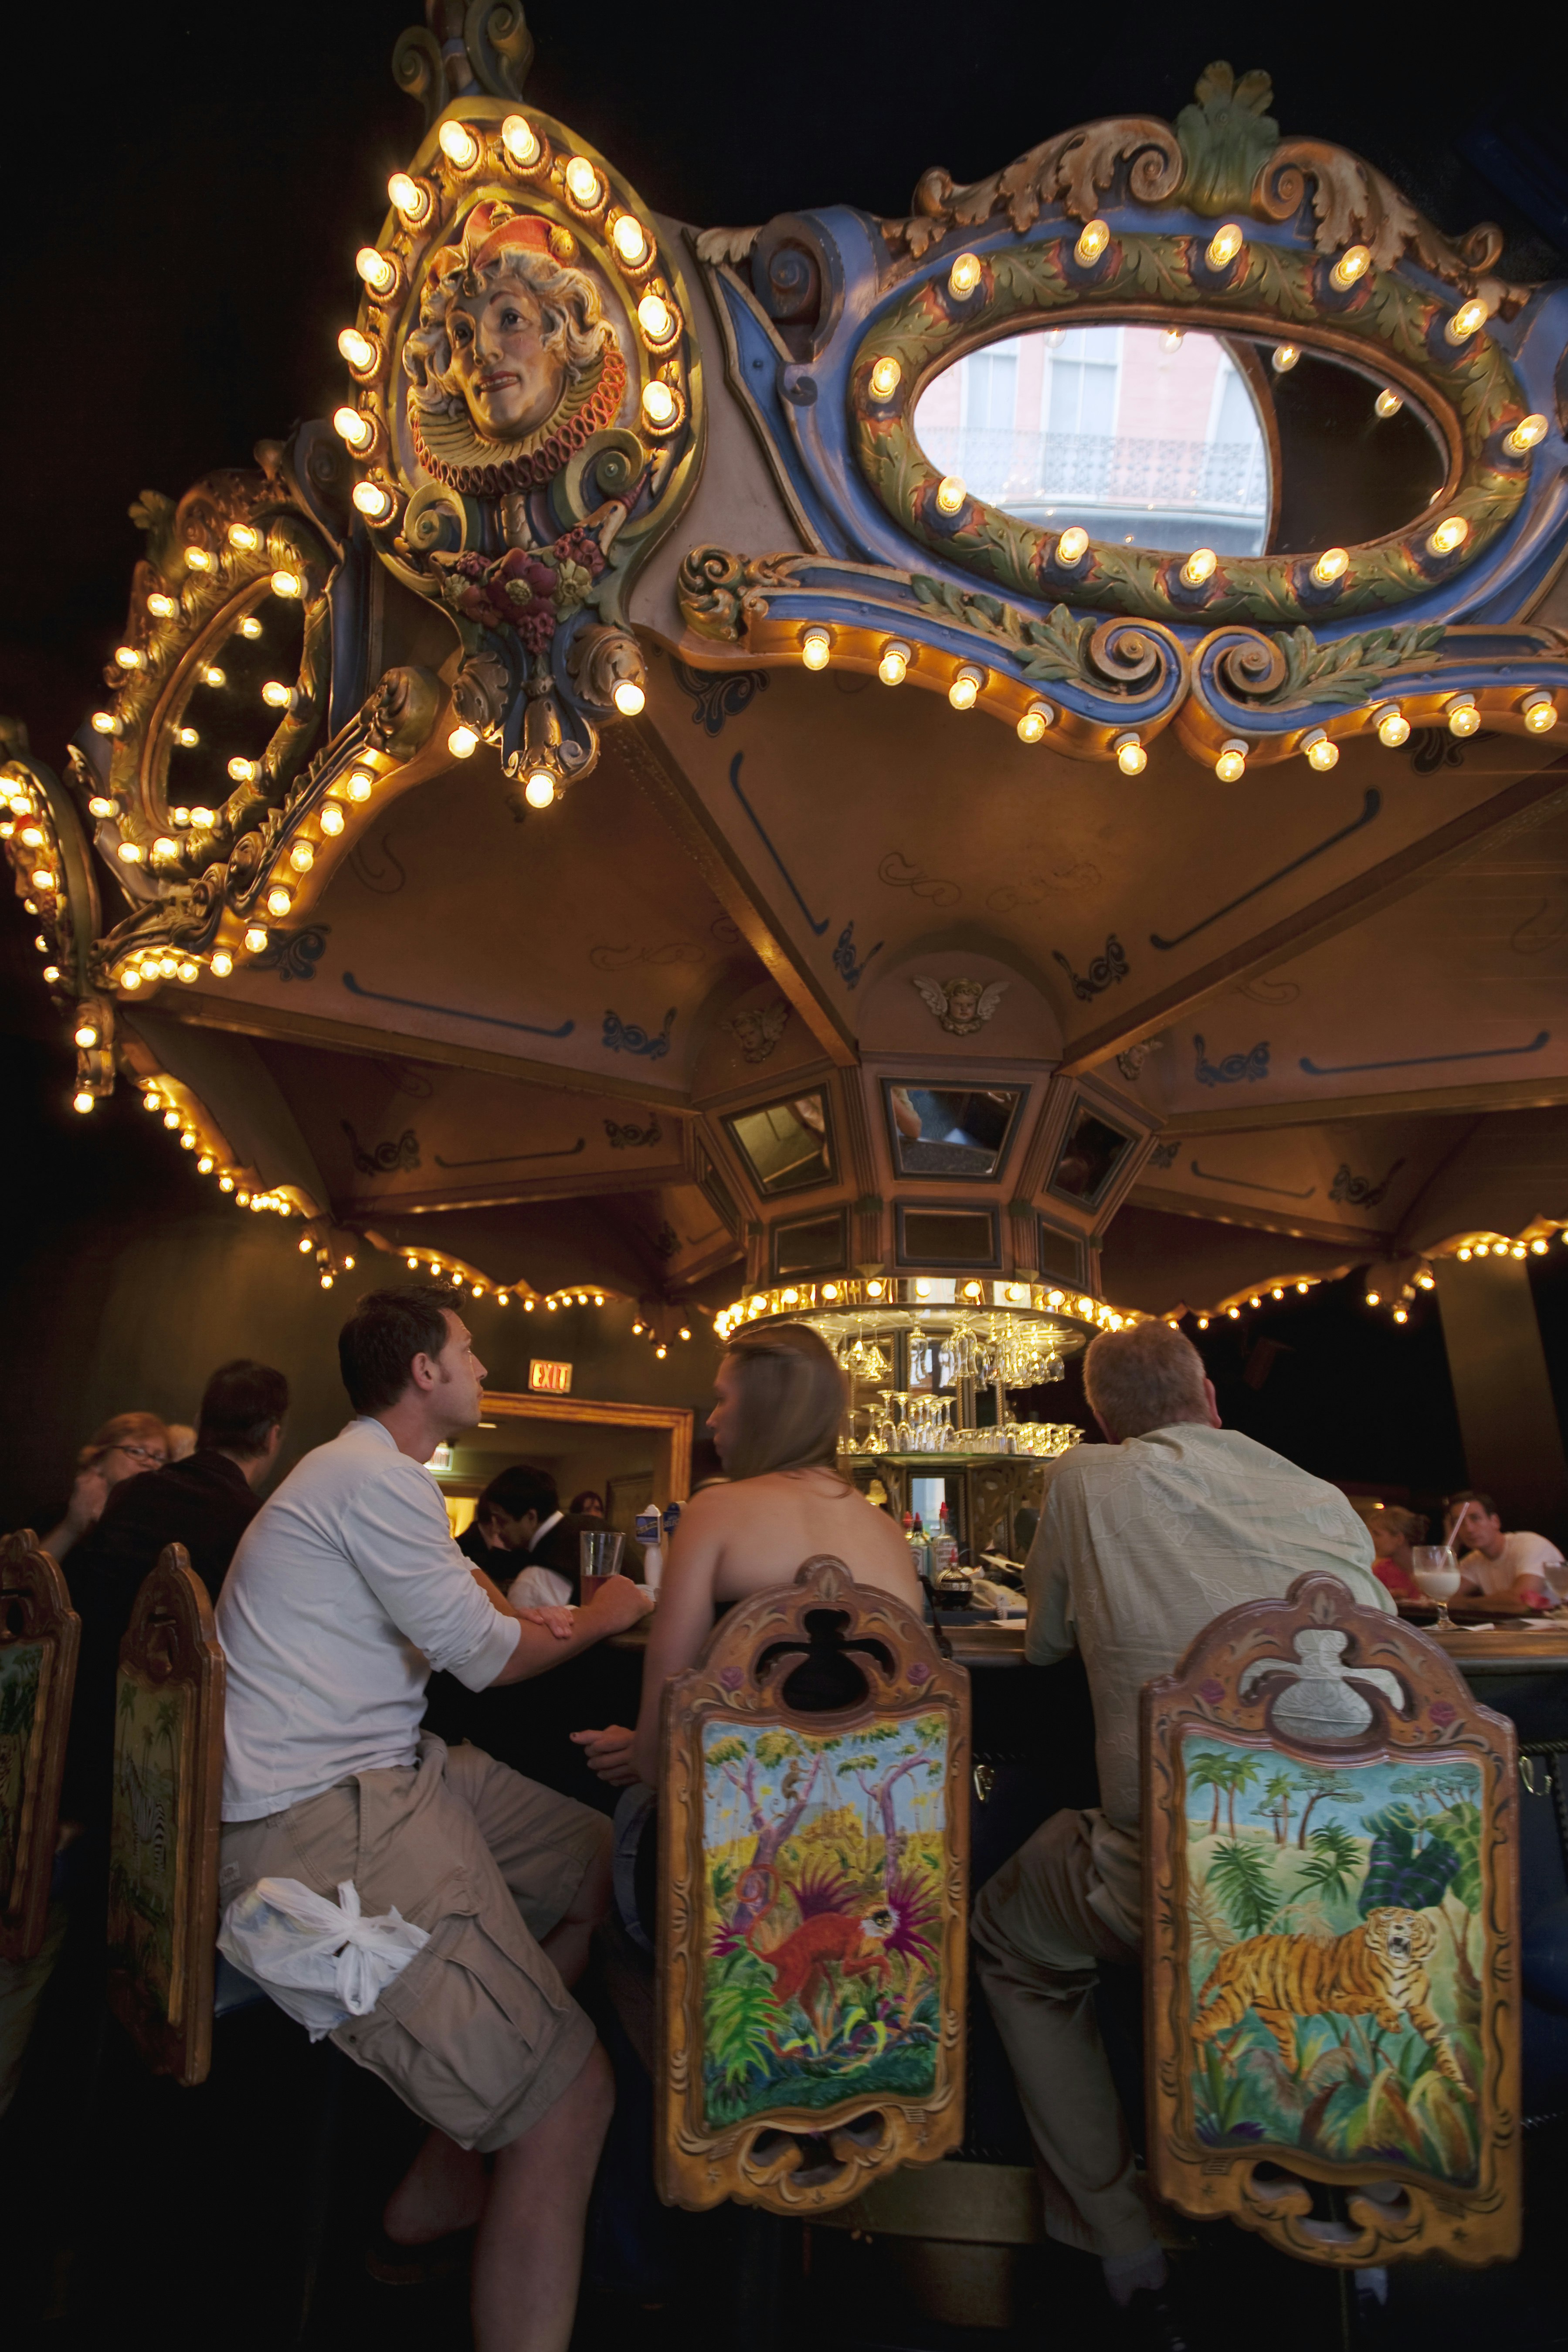 Patrons drinking at the rotating carousel bar, decorated with lights and colorful animals